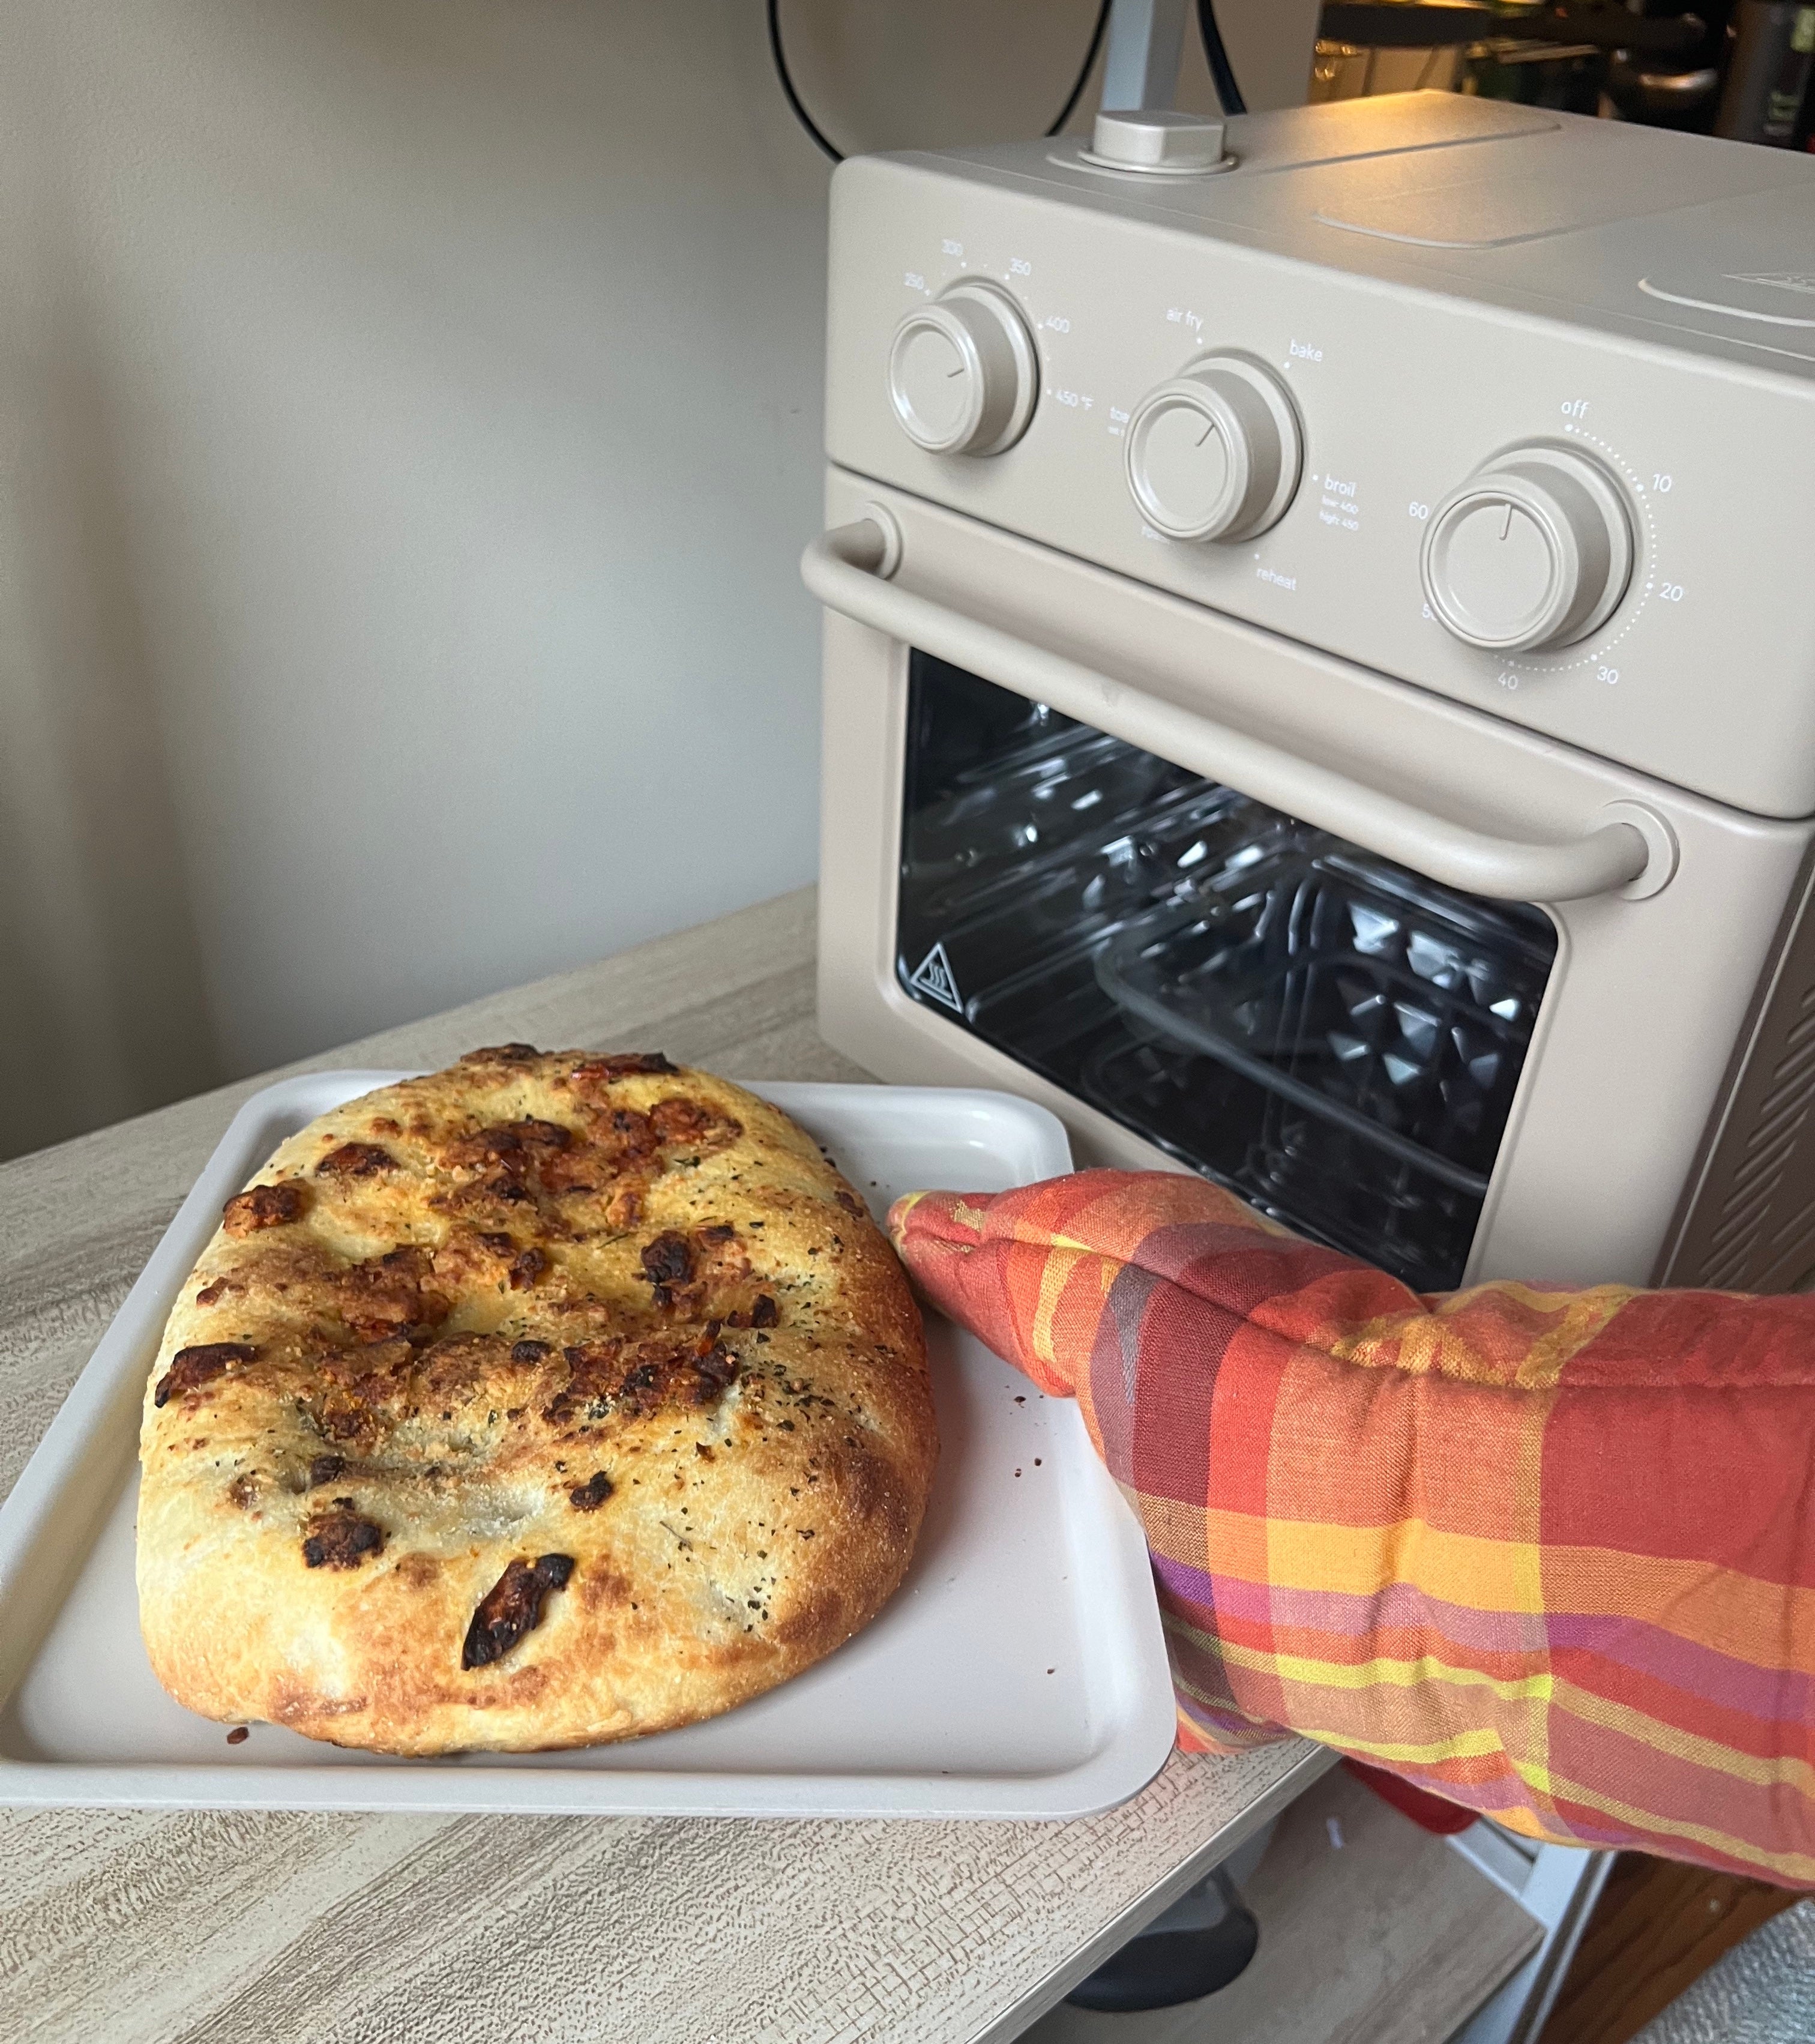 All About Our Place's New 'Wonder Oven' Air Fryer Thing